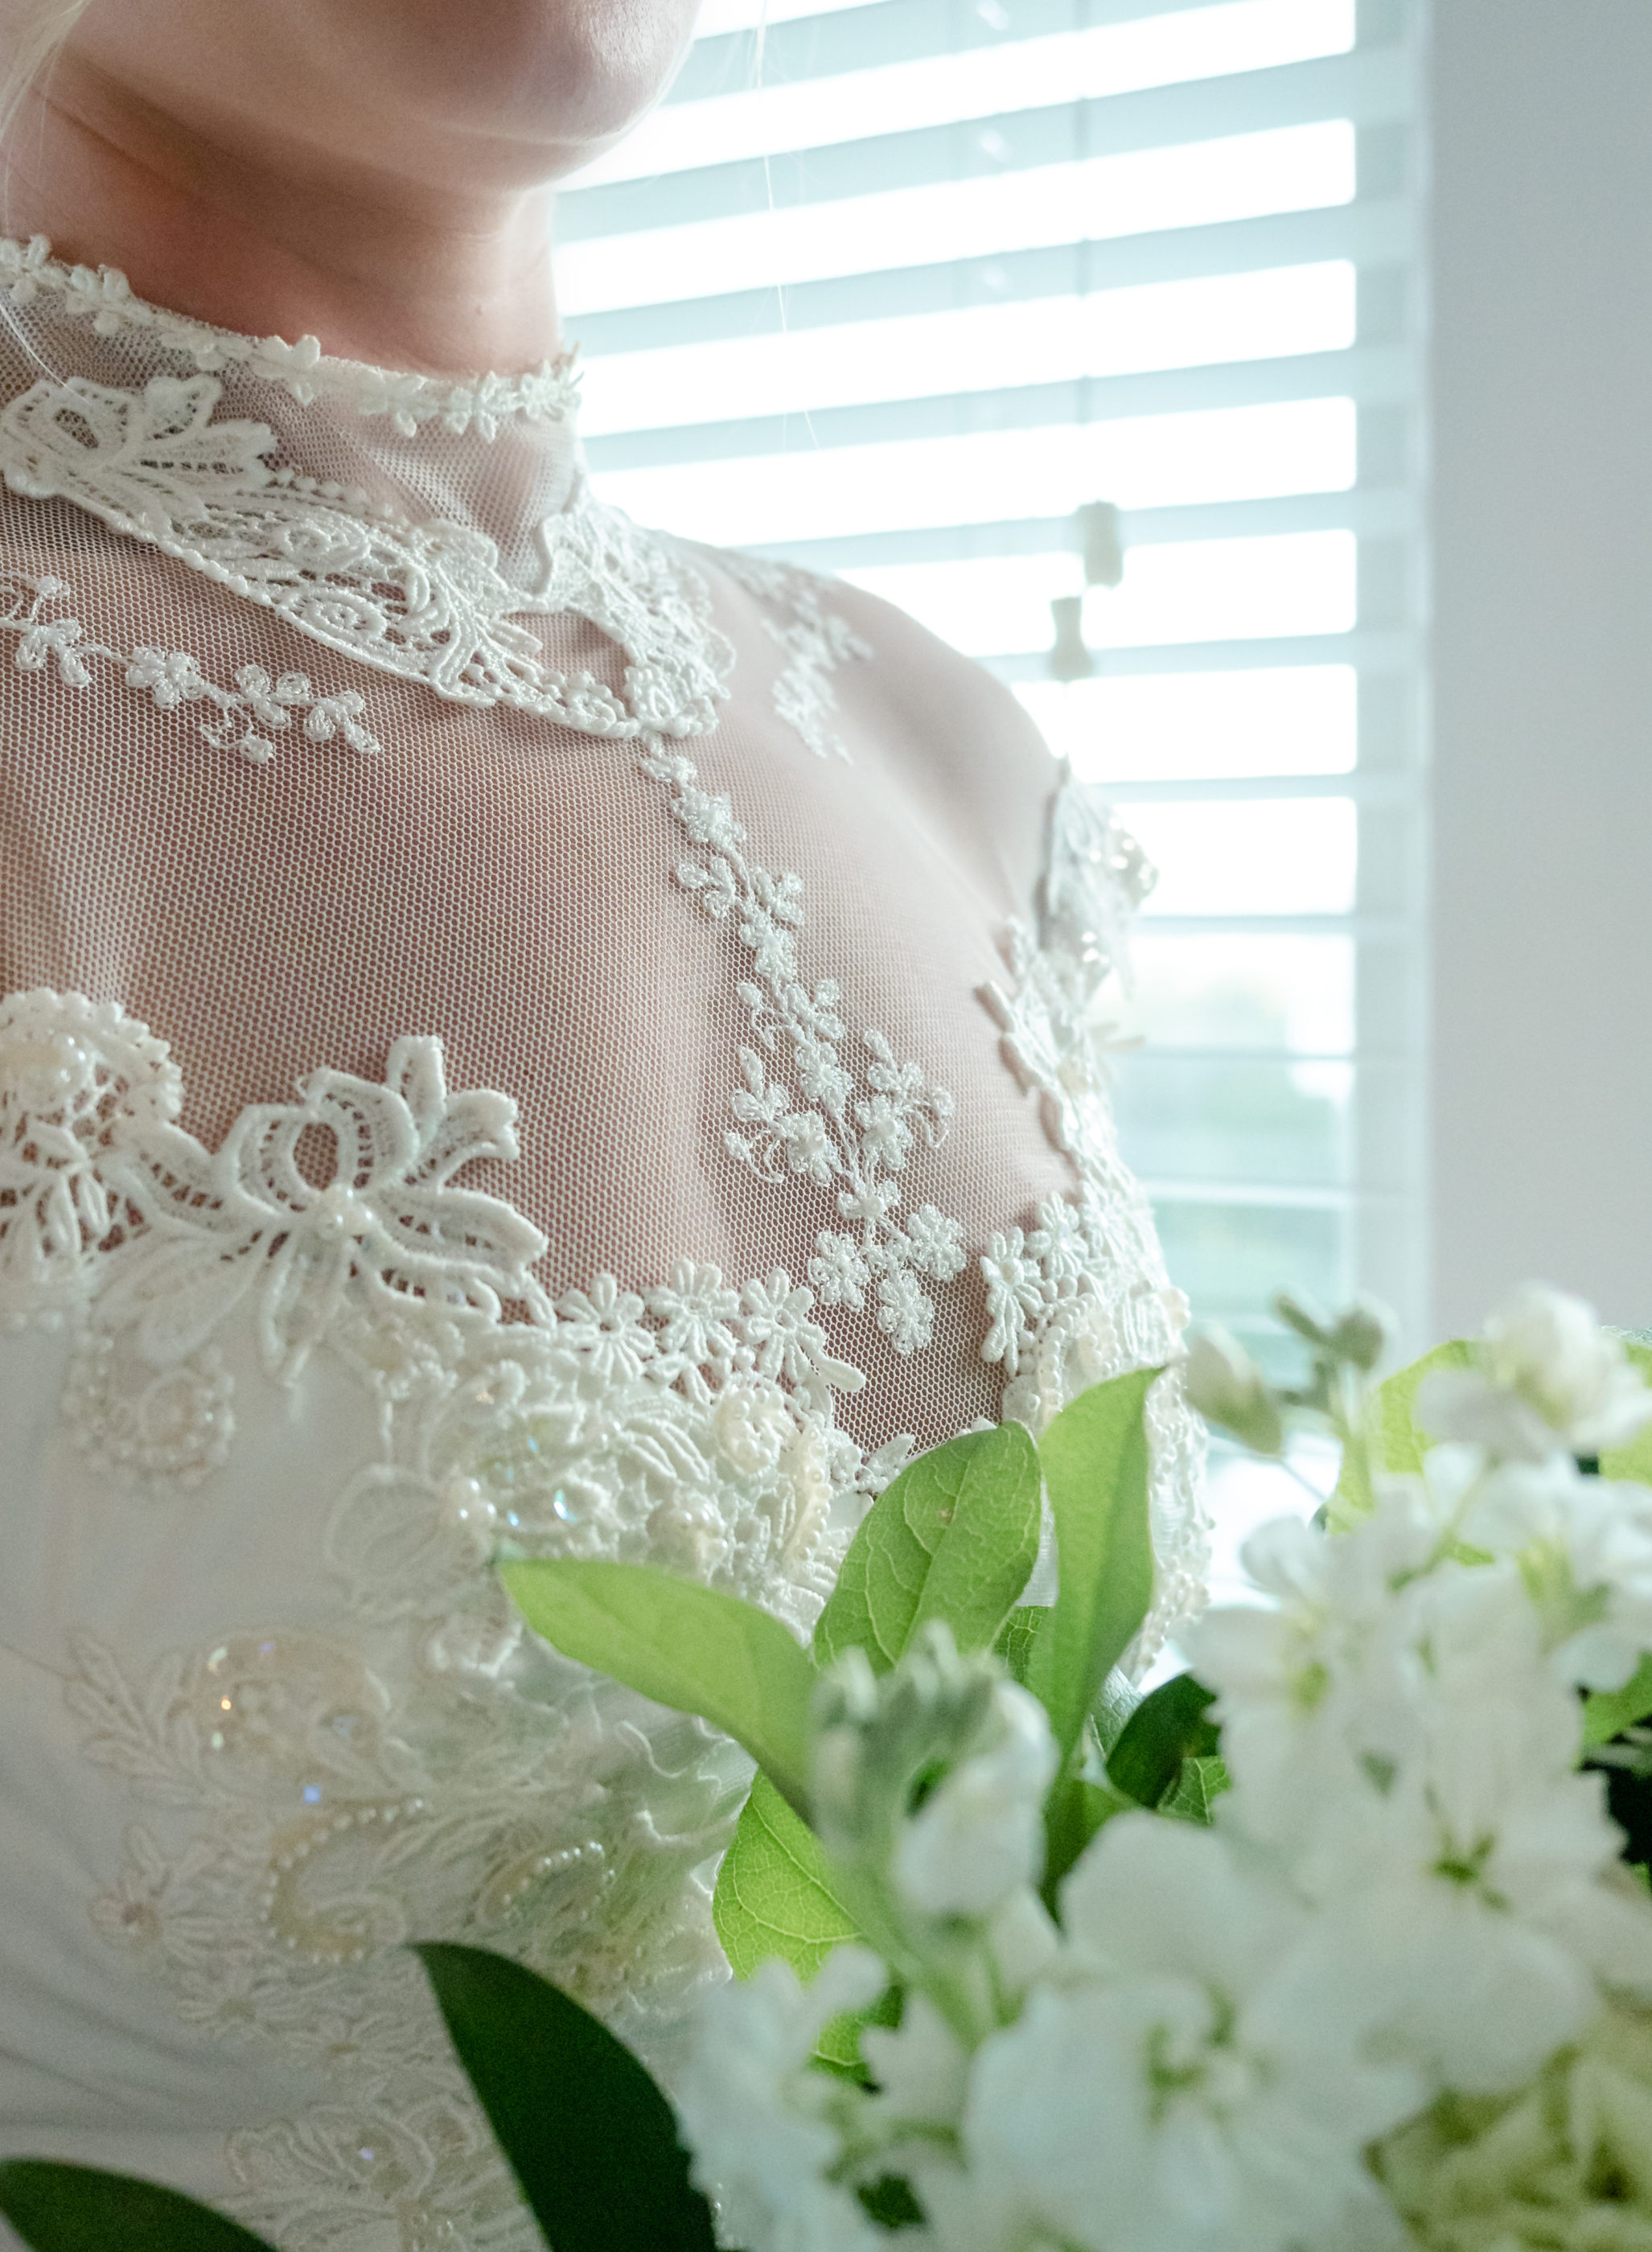 brides bodice details with her bouquet in front of the window